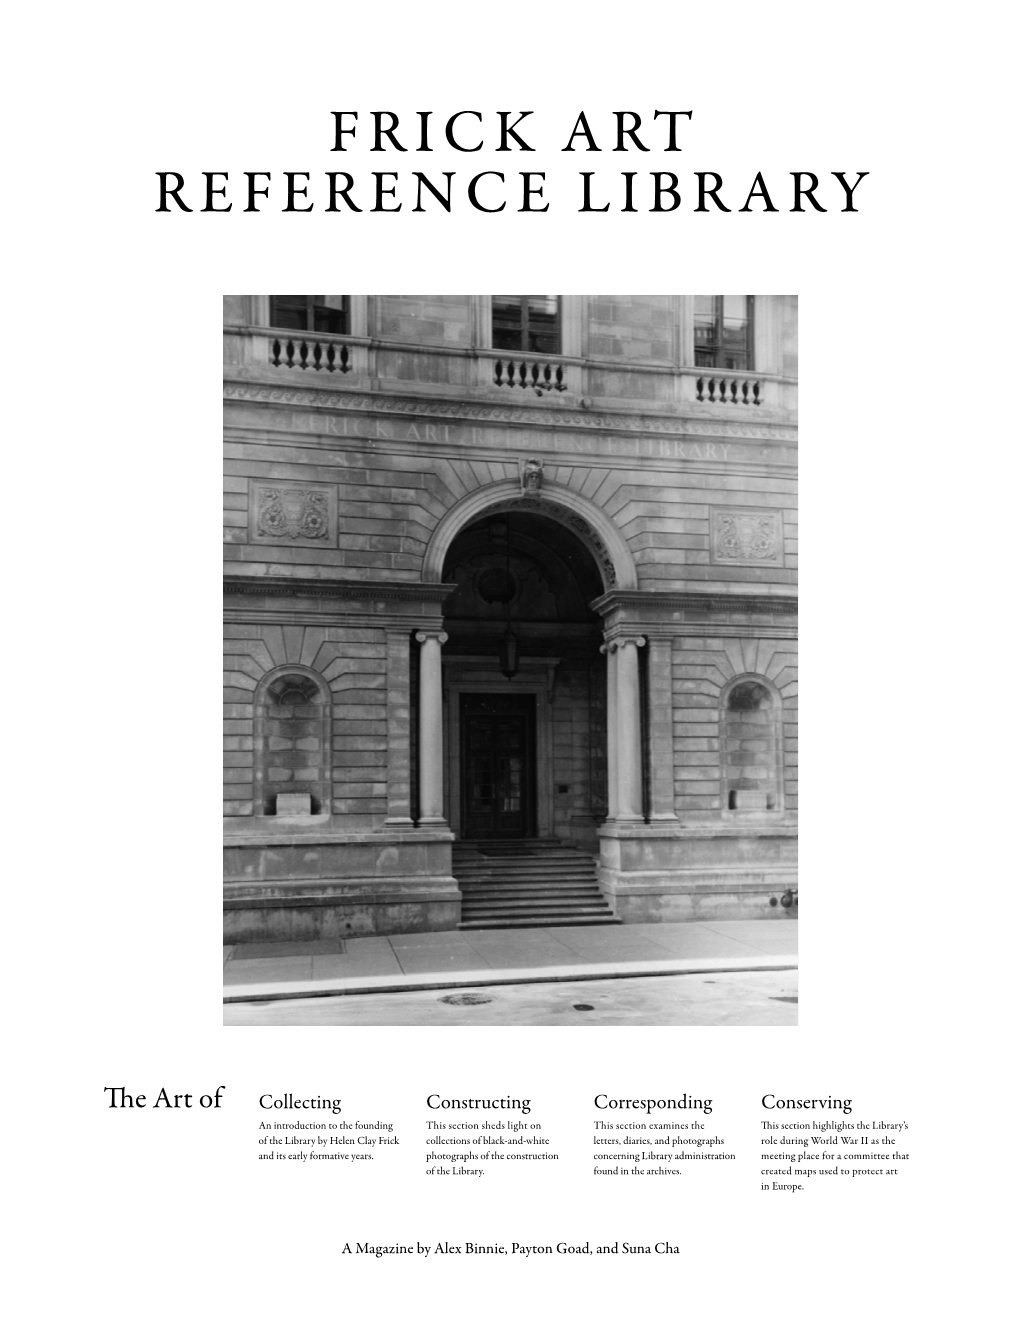 Frick Art Reference Library